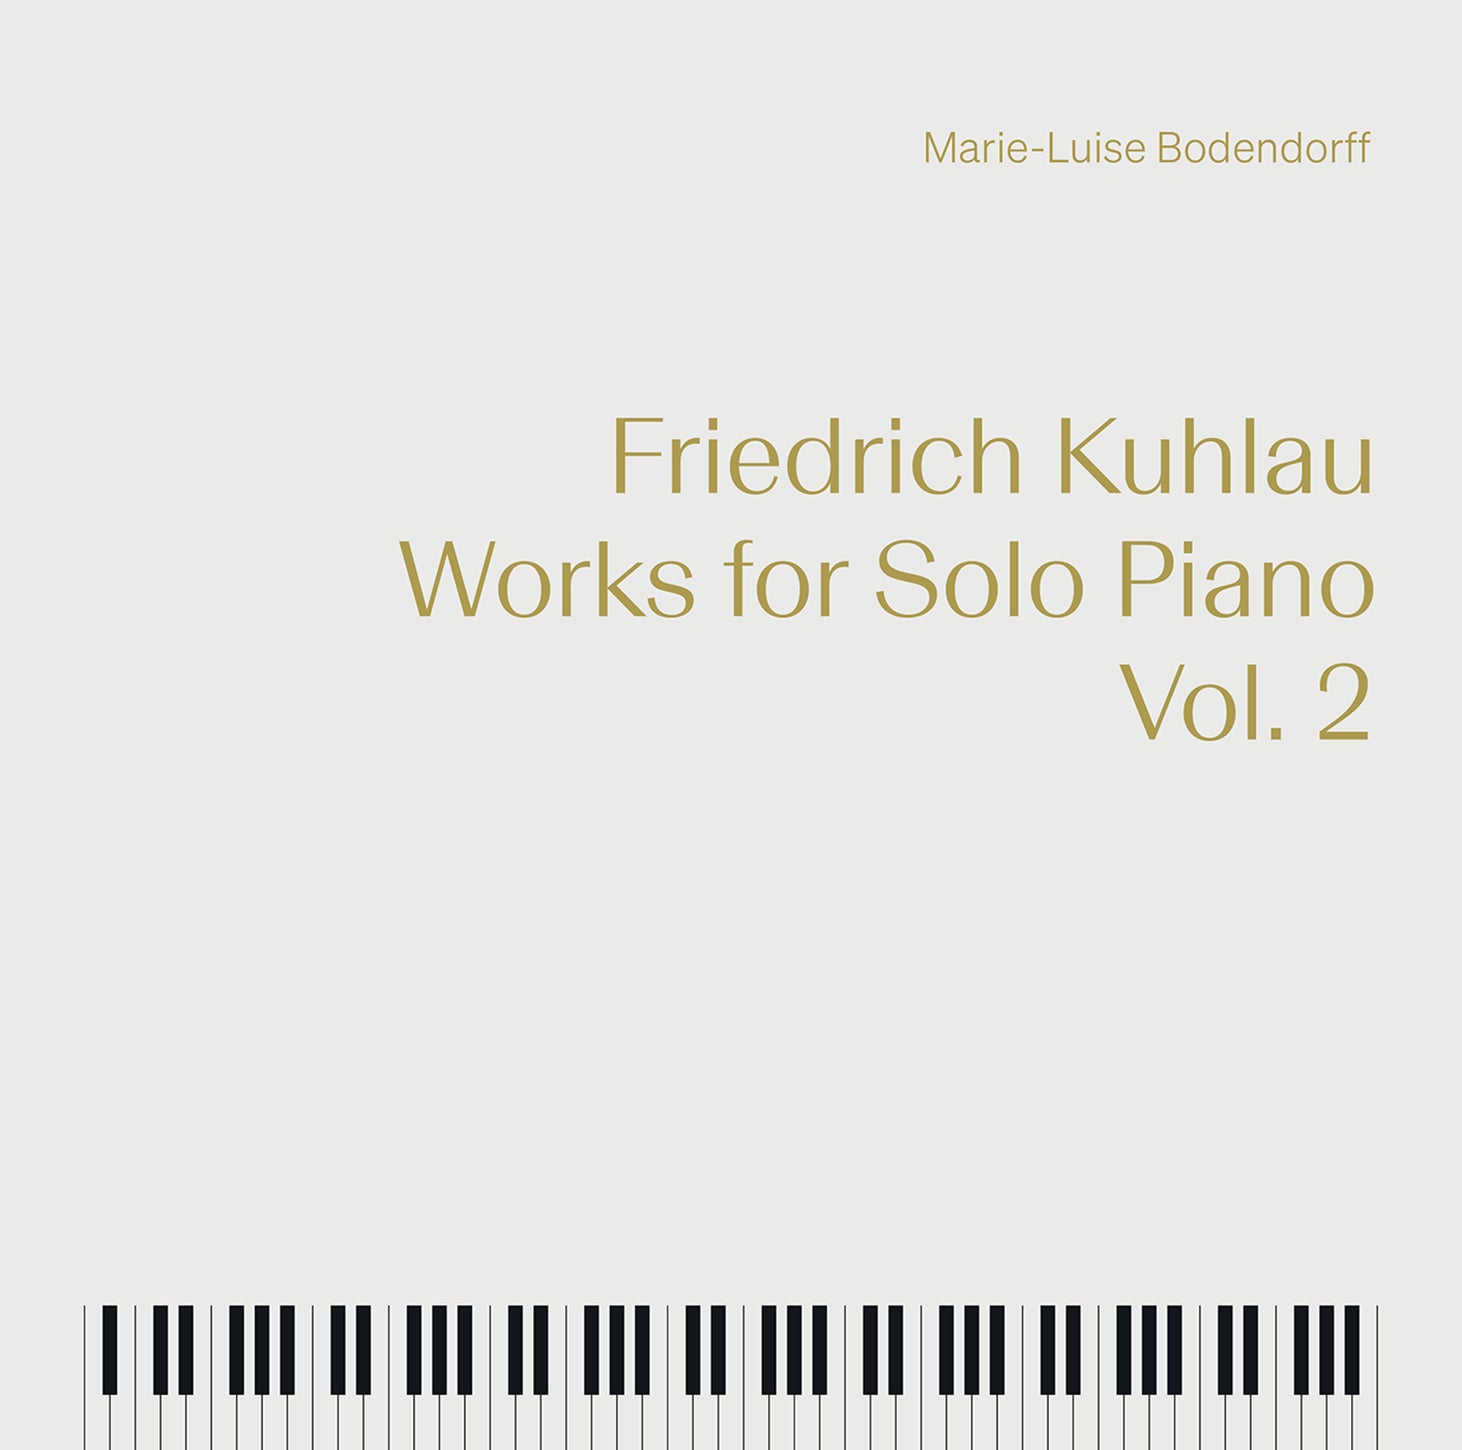 Kuhlau: Works for Solo Piano, Vol. 2 / Bodendorff